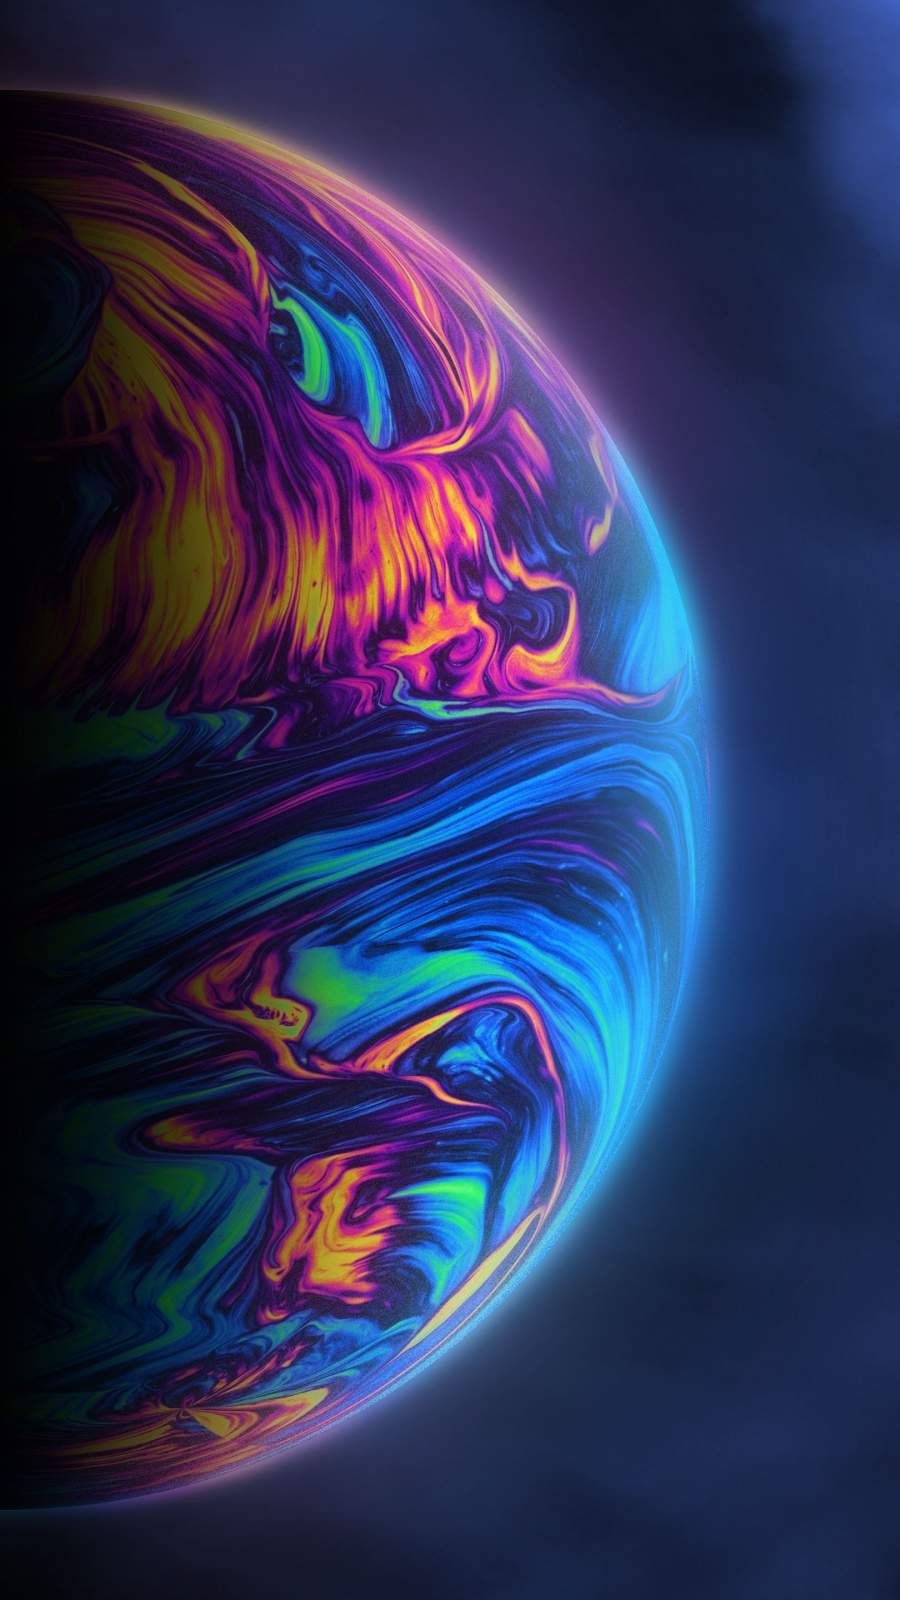 iPhone Wallpaper For And